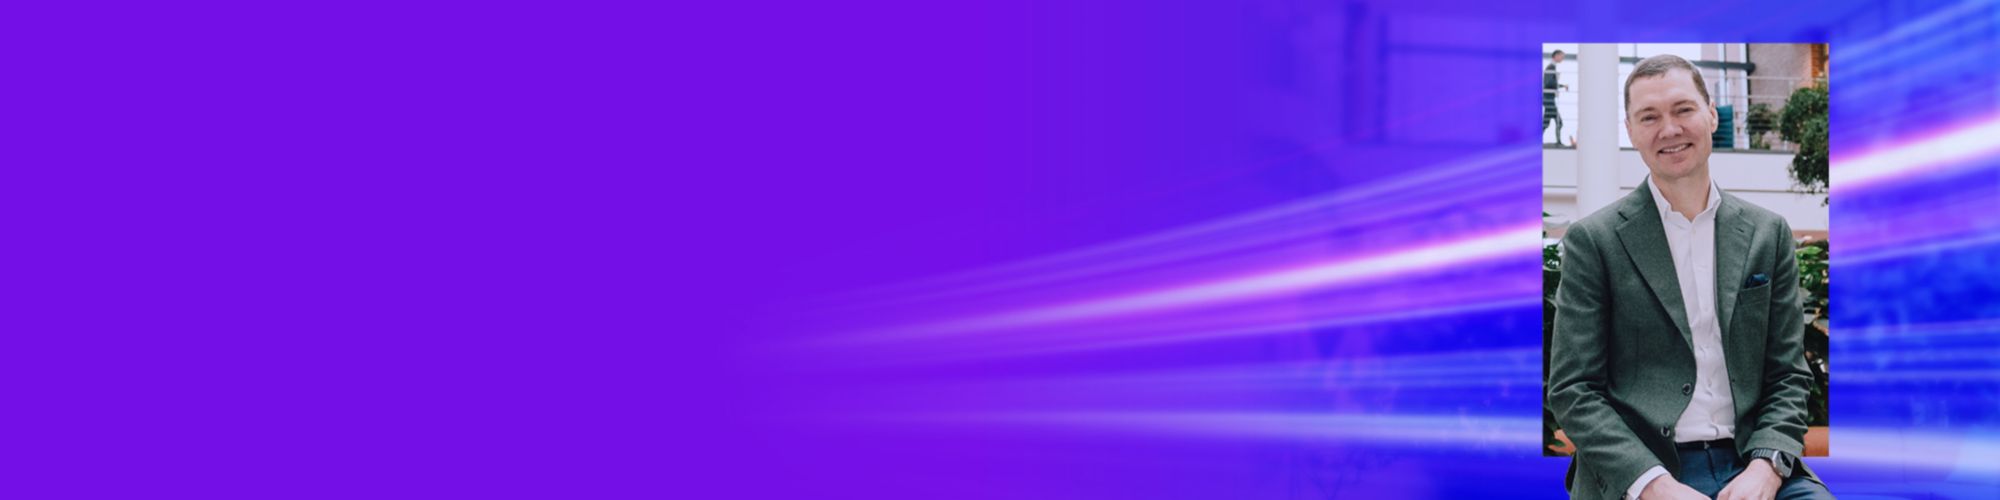 Person on purple background